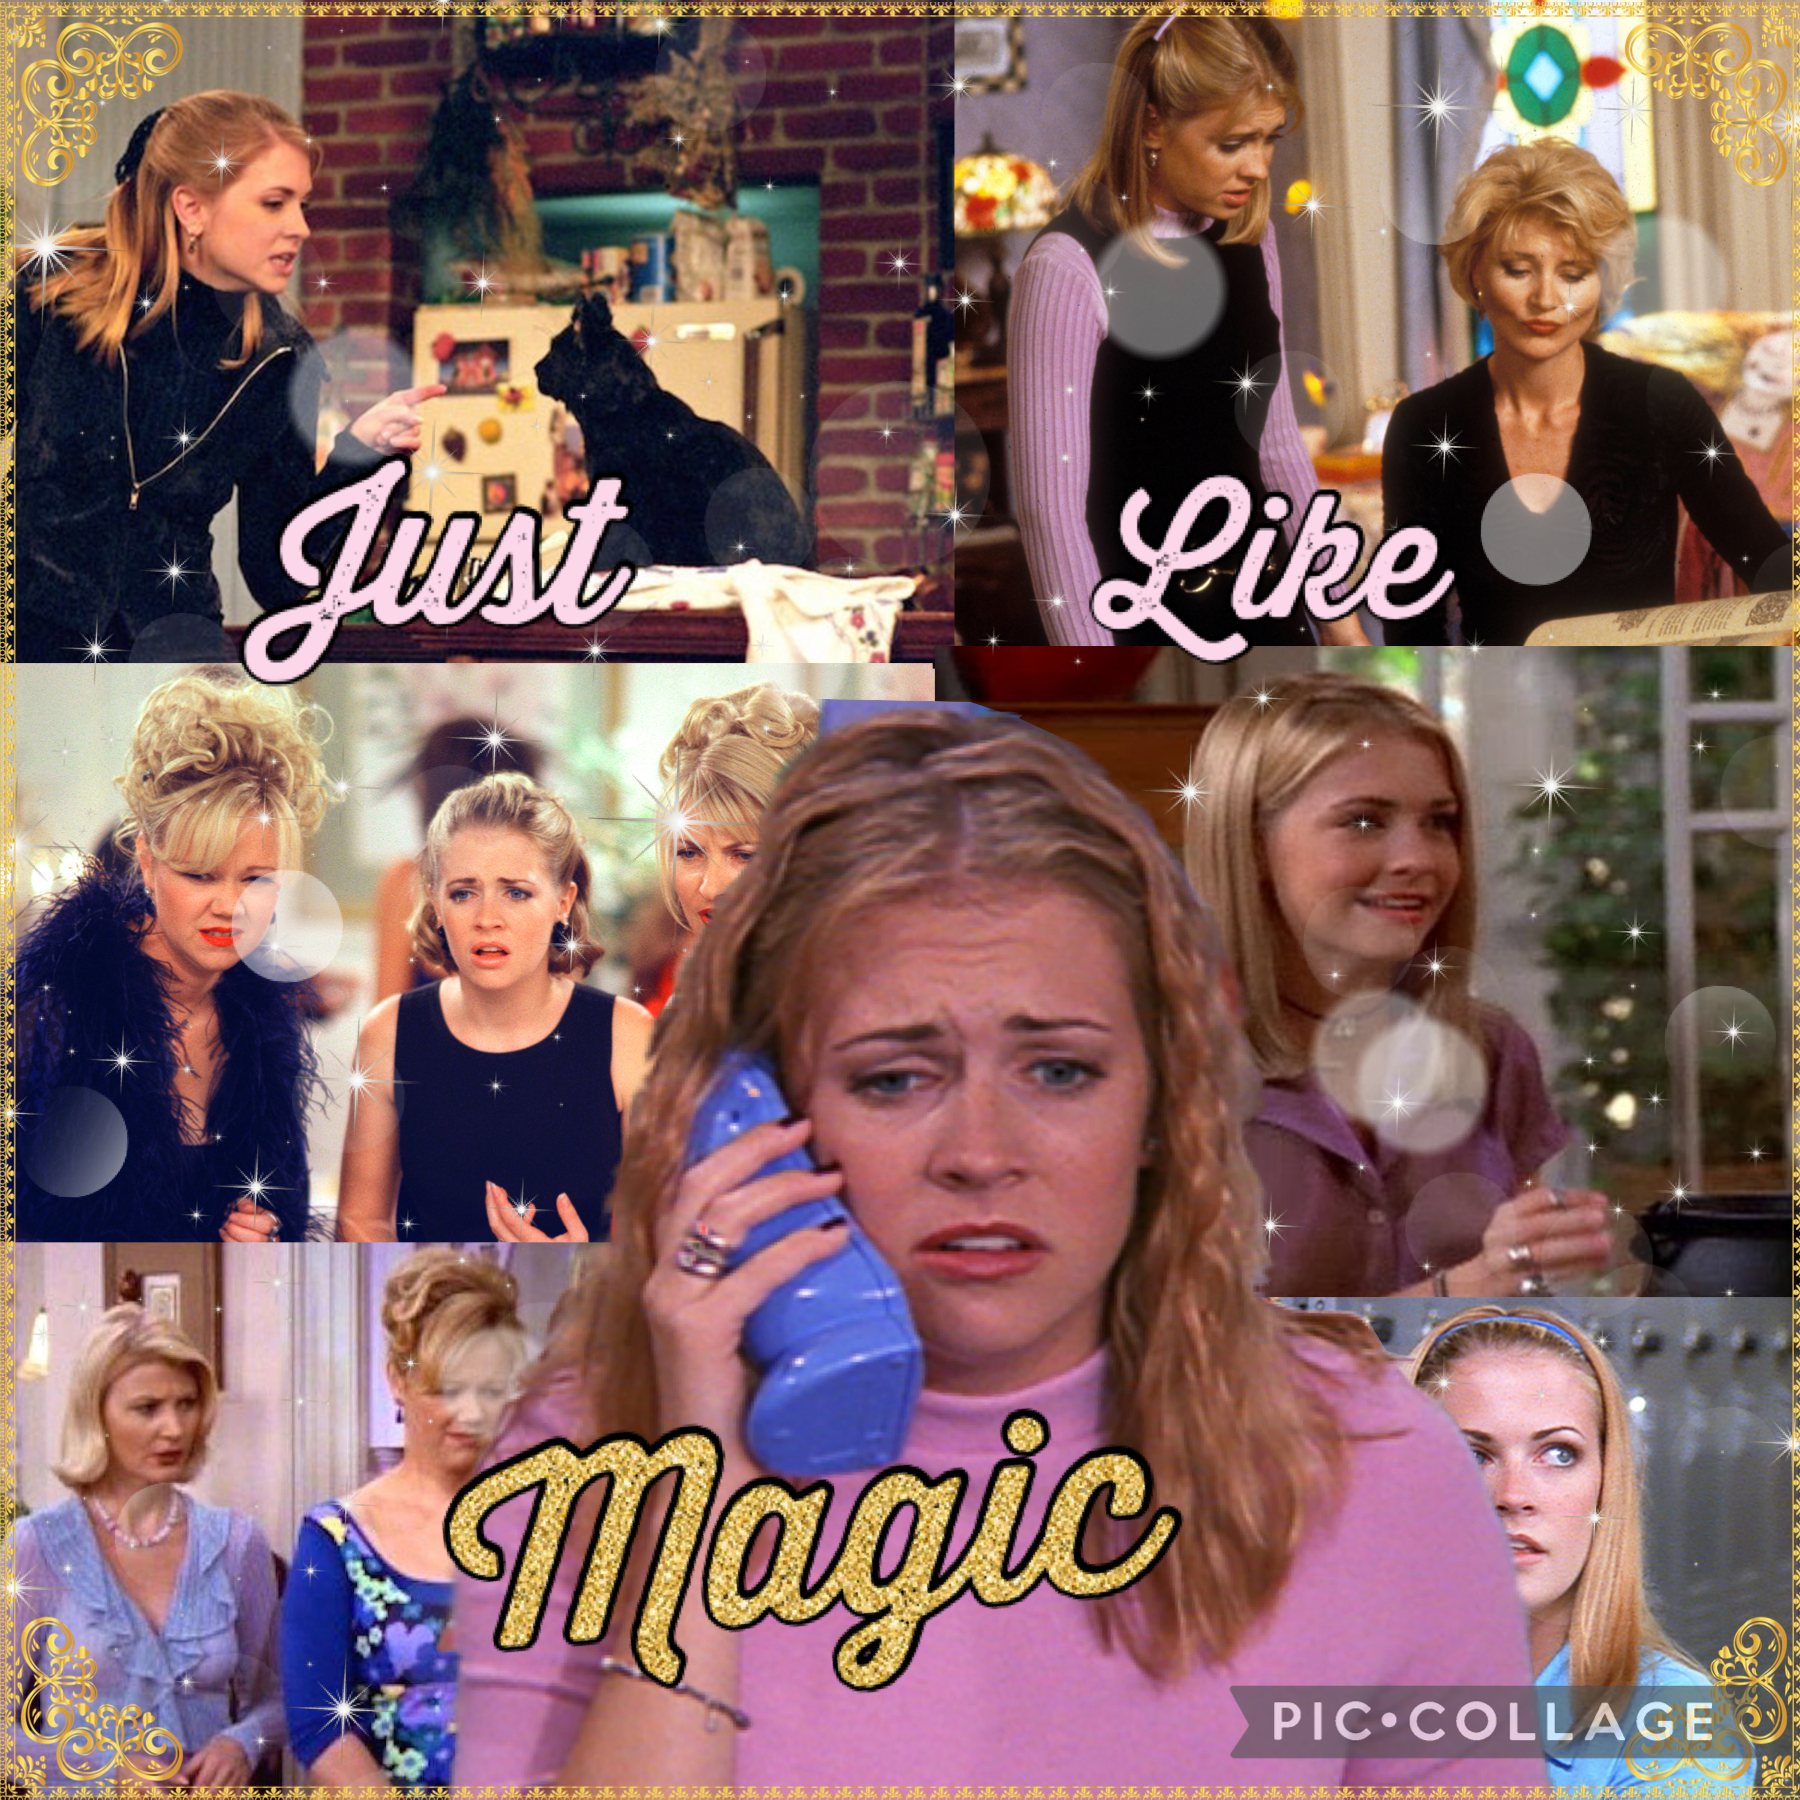 17.6.22 Sabrina the teenage witch aesthetic collage.